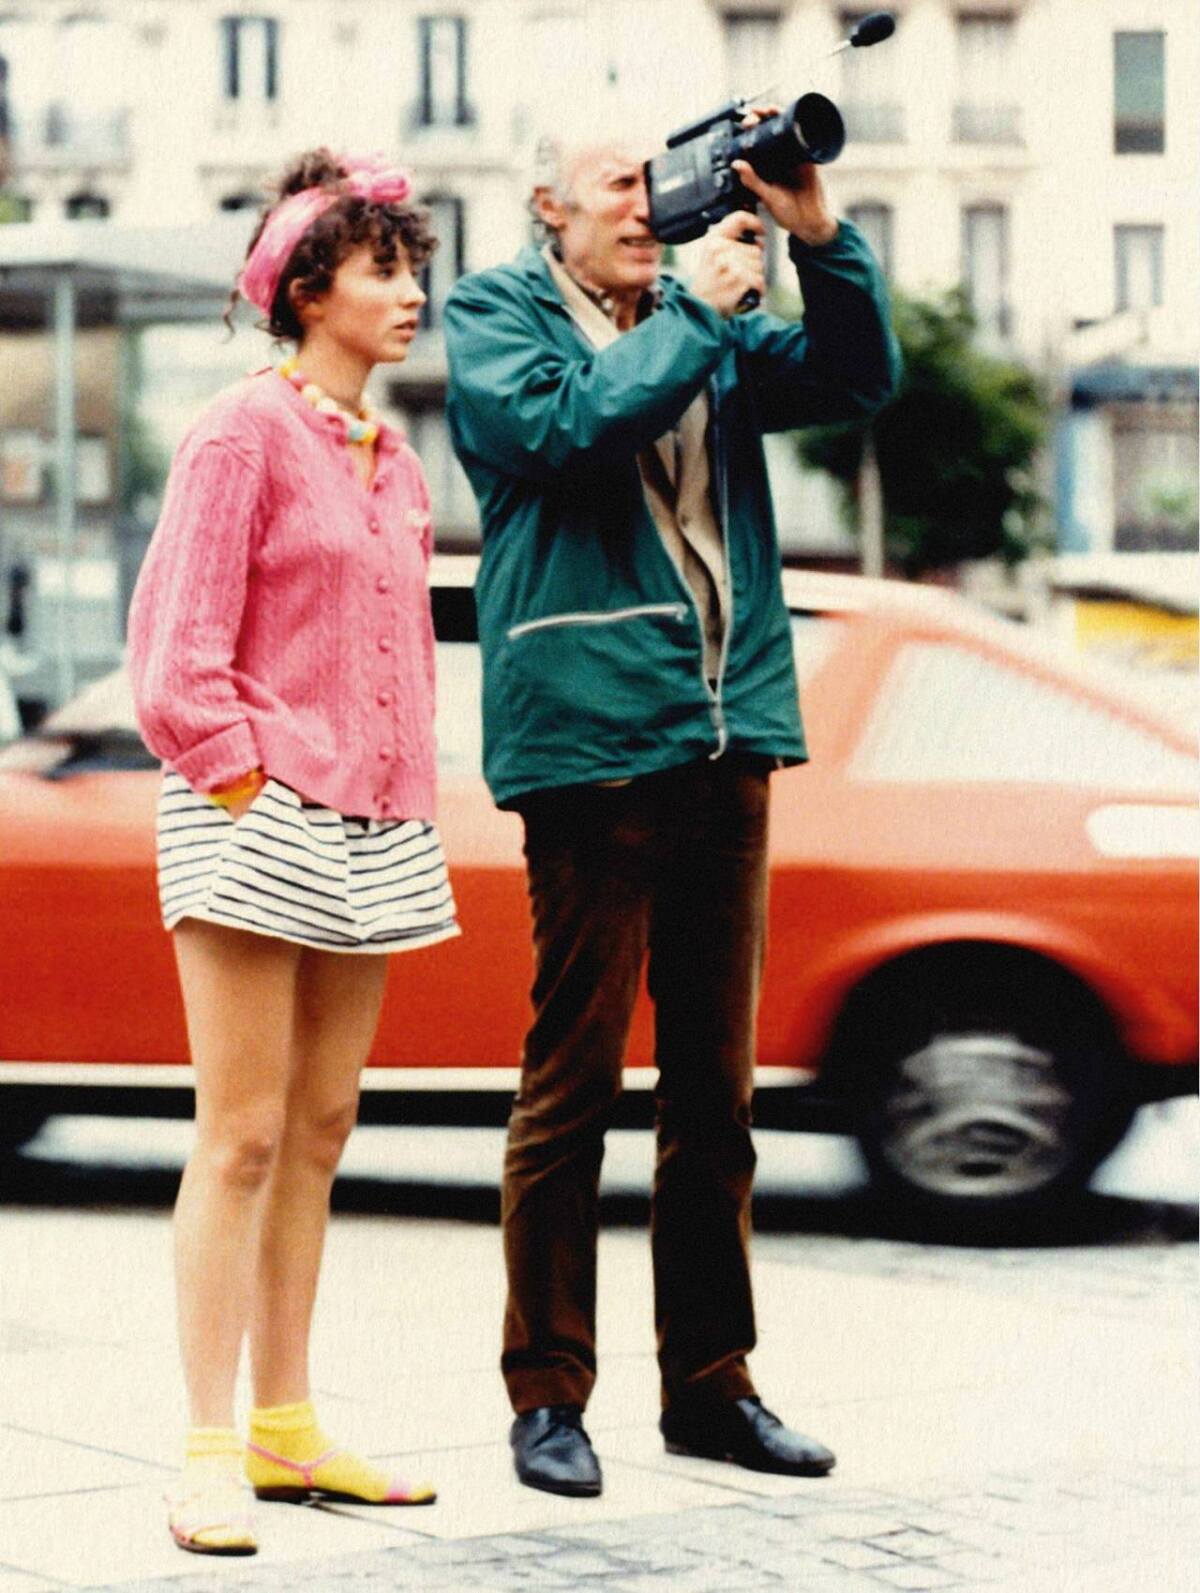 A woman in a pink jacket stands with a man shooting a camera.